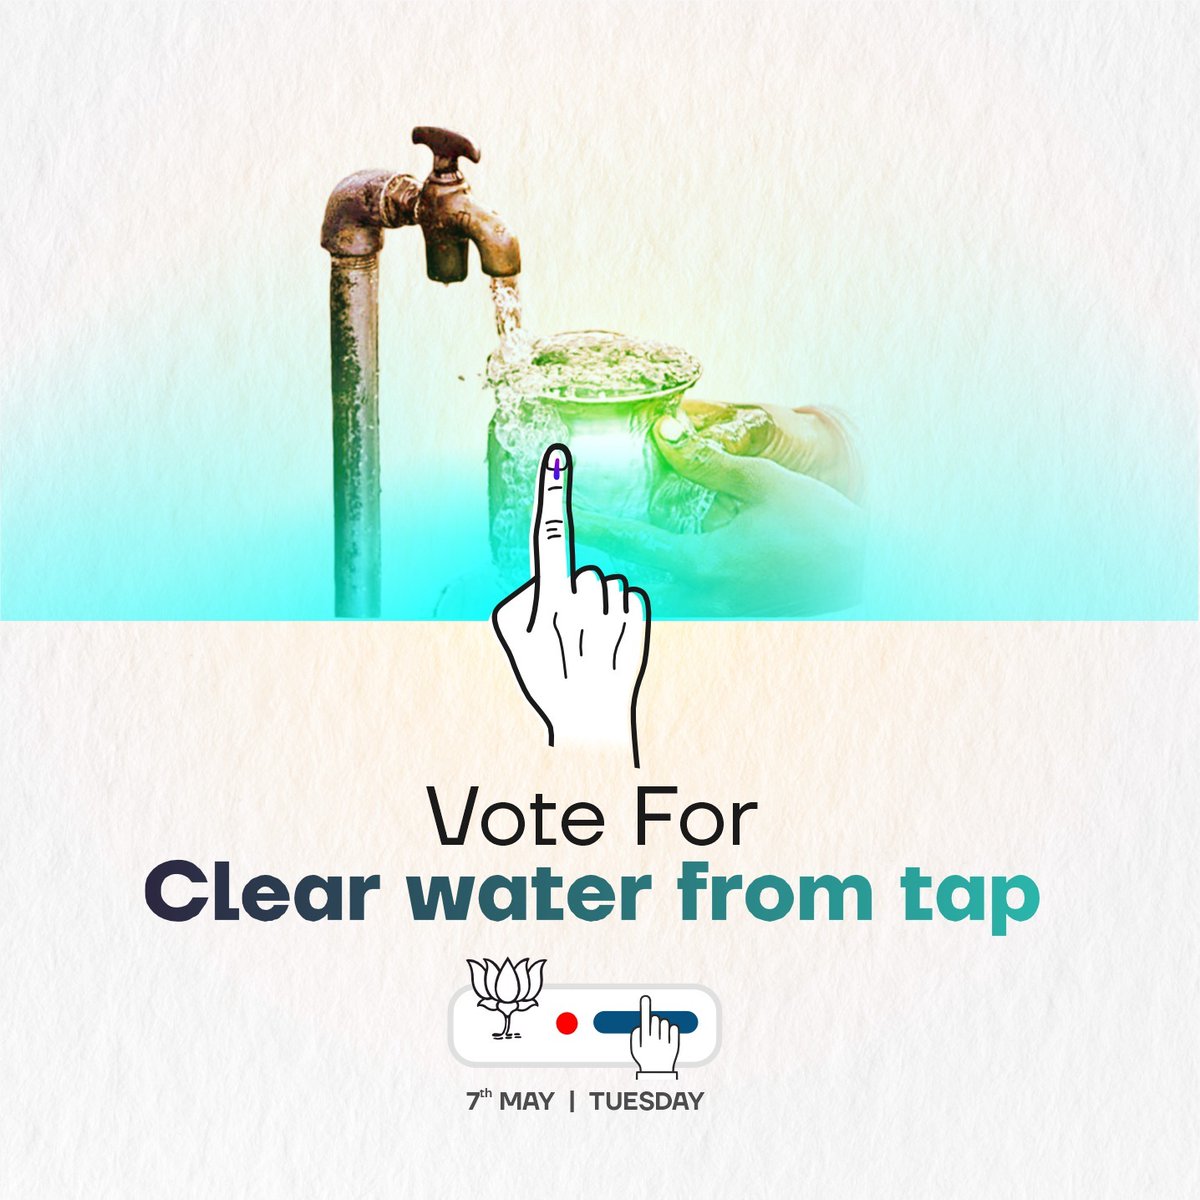 Vote For Free Clear Water From Tap
Vote For Modi Government 🪷✌️

#PhirEKBarModiSarkar 
#AbkiBar400Paar